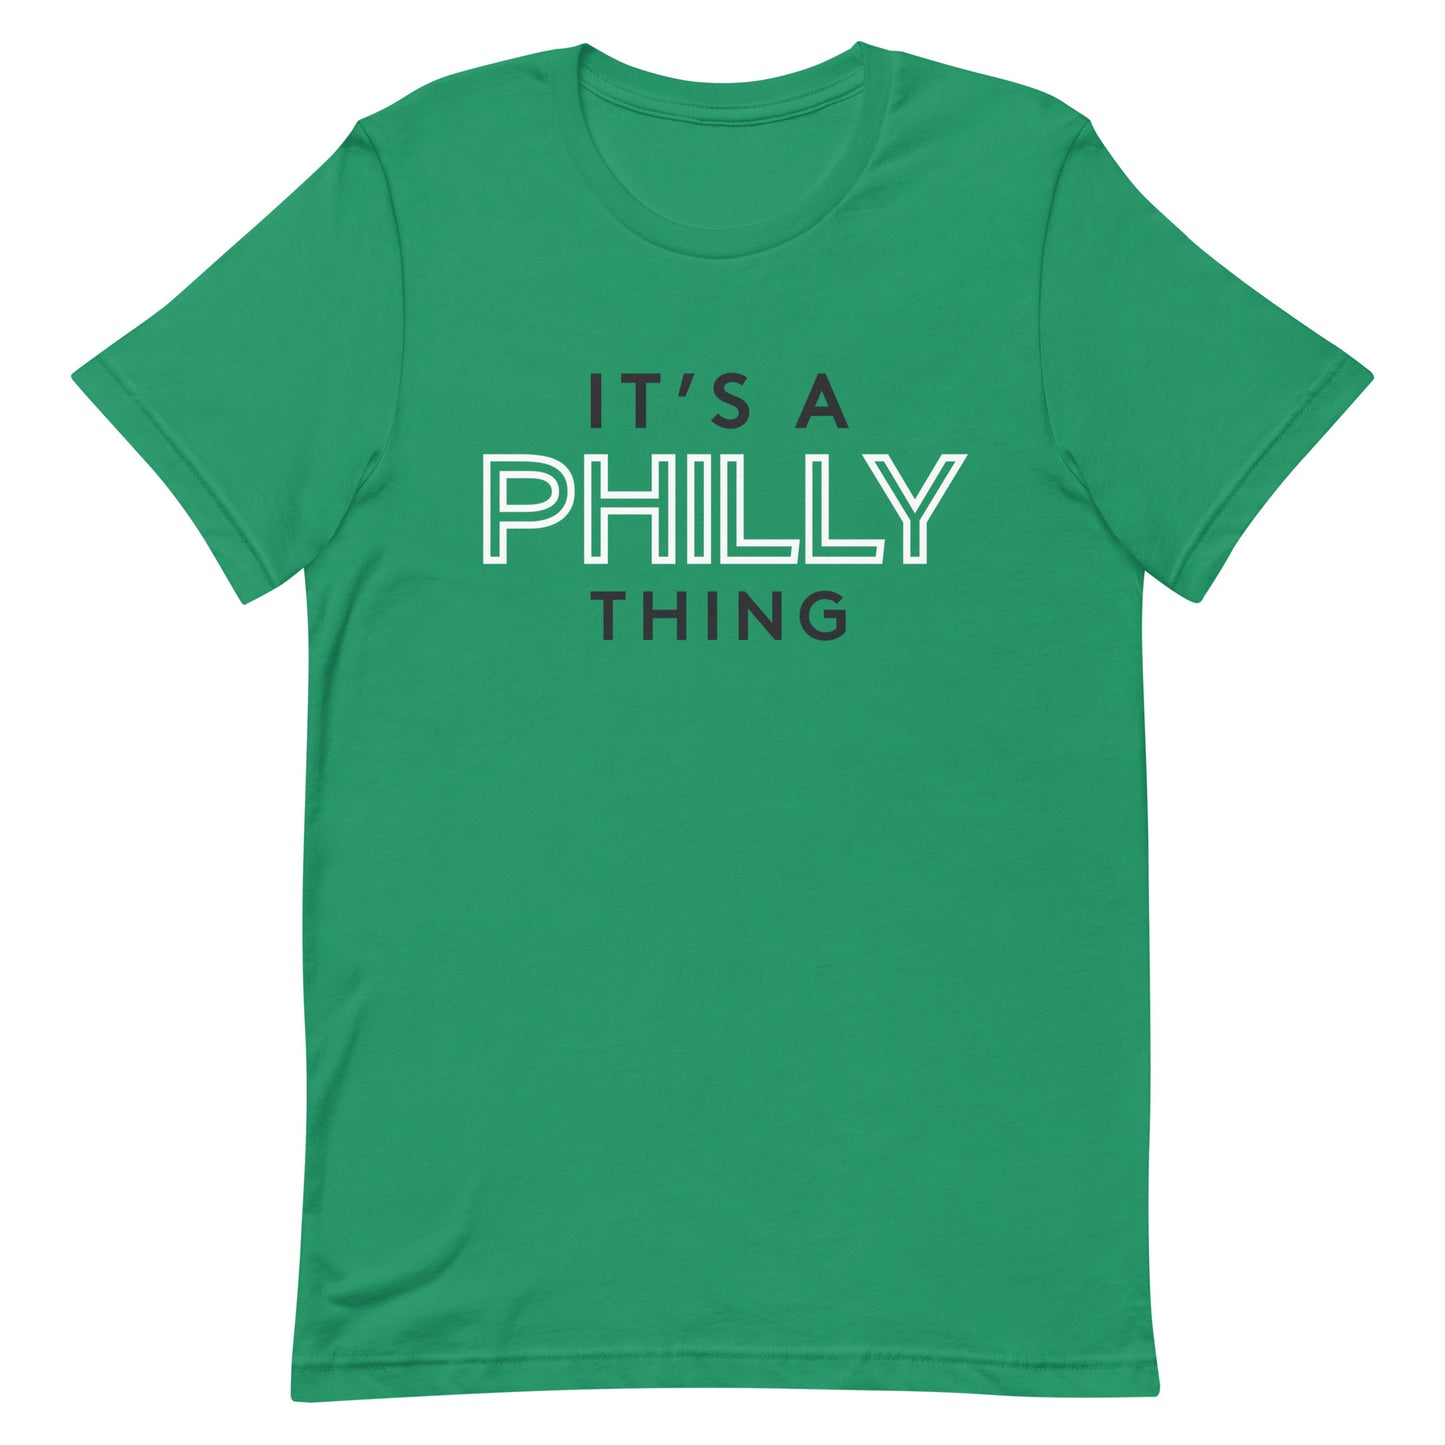 South Street Threads It's A Philly Thing Shirt Green / XL